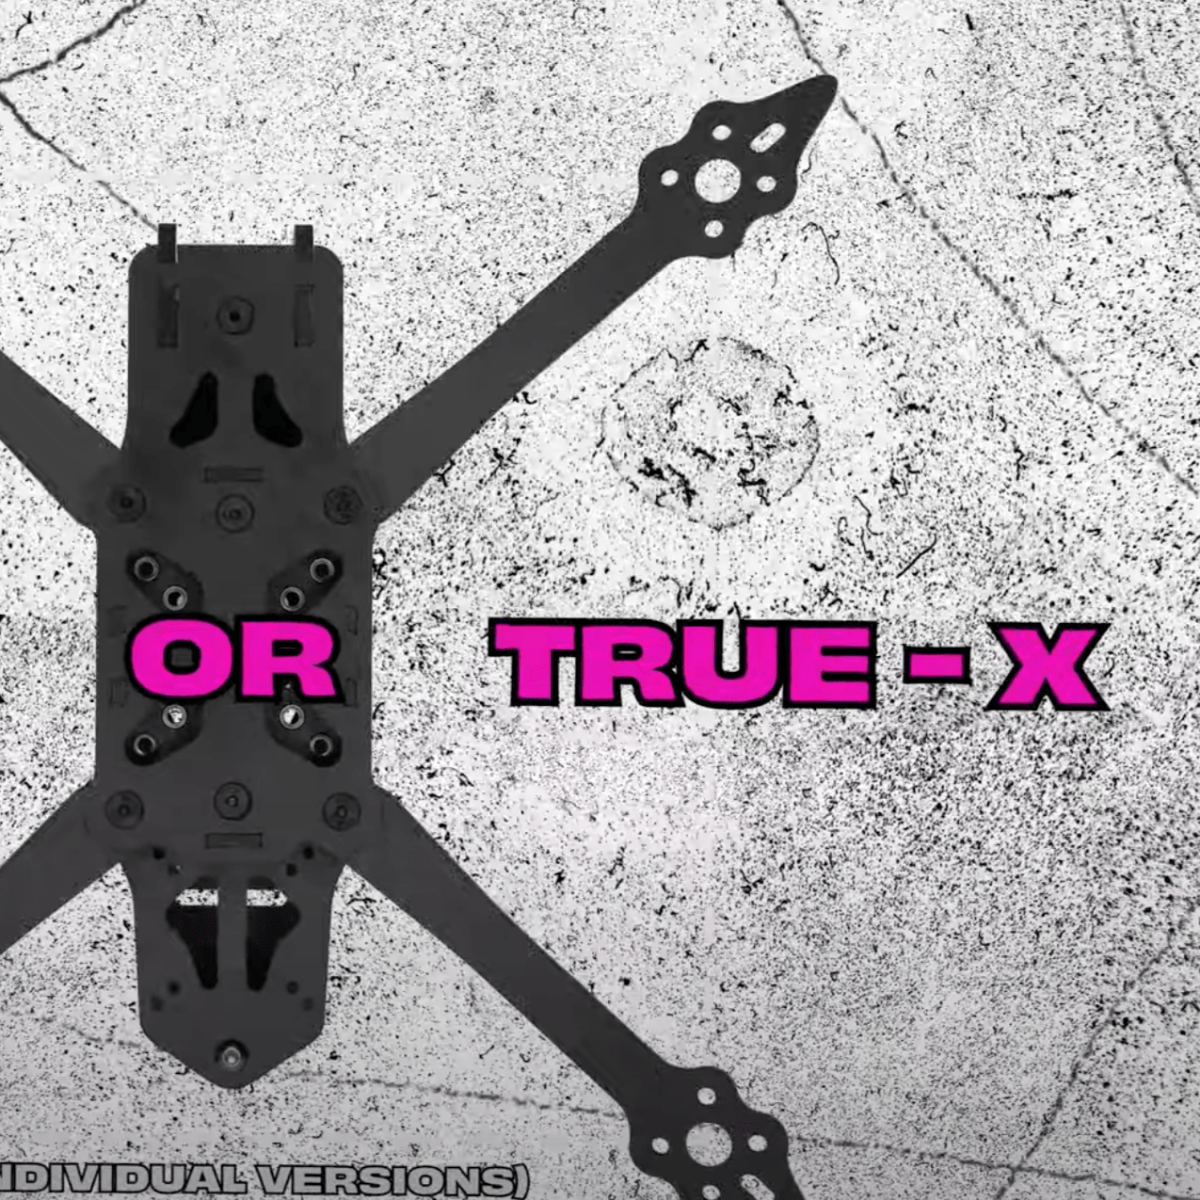 Vannystyle Pro 5" FPV Drone Frame Kit w/ Improved Arm Design!